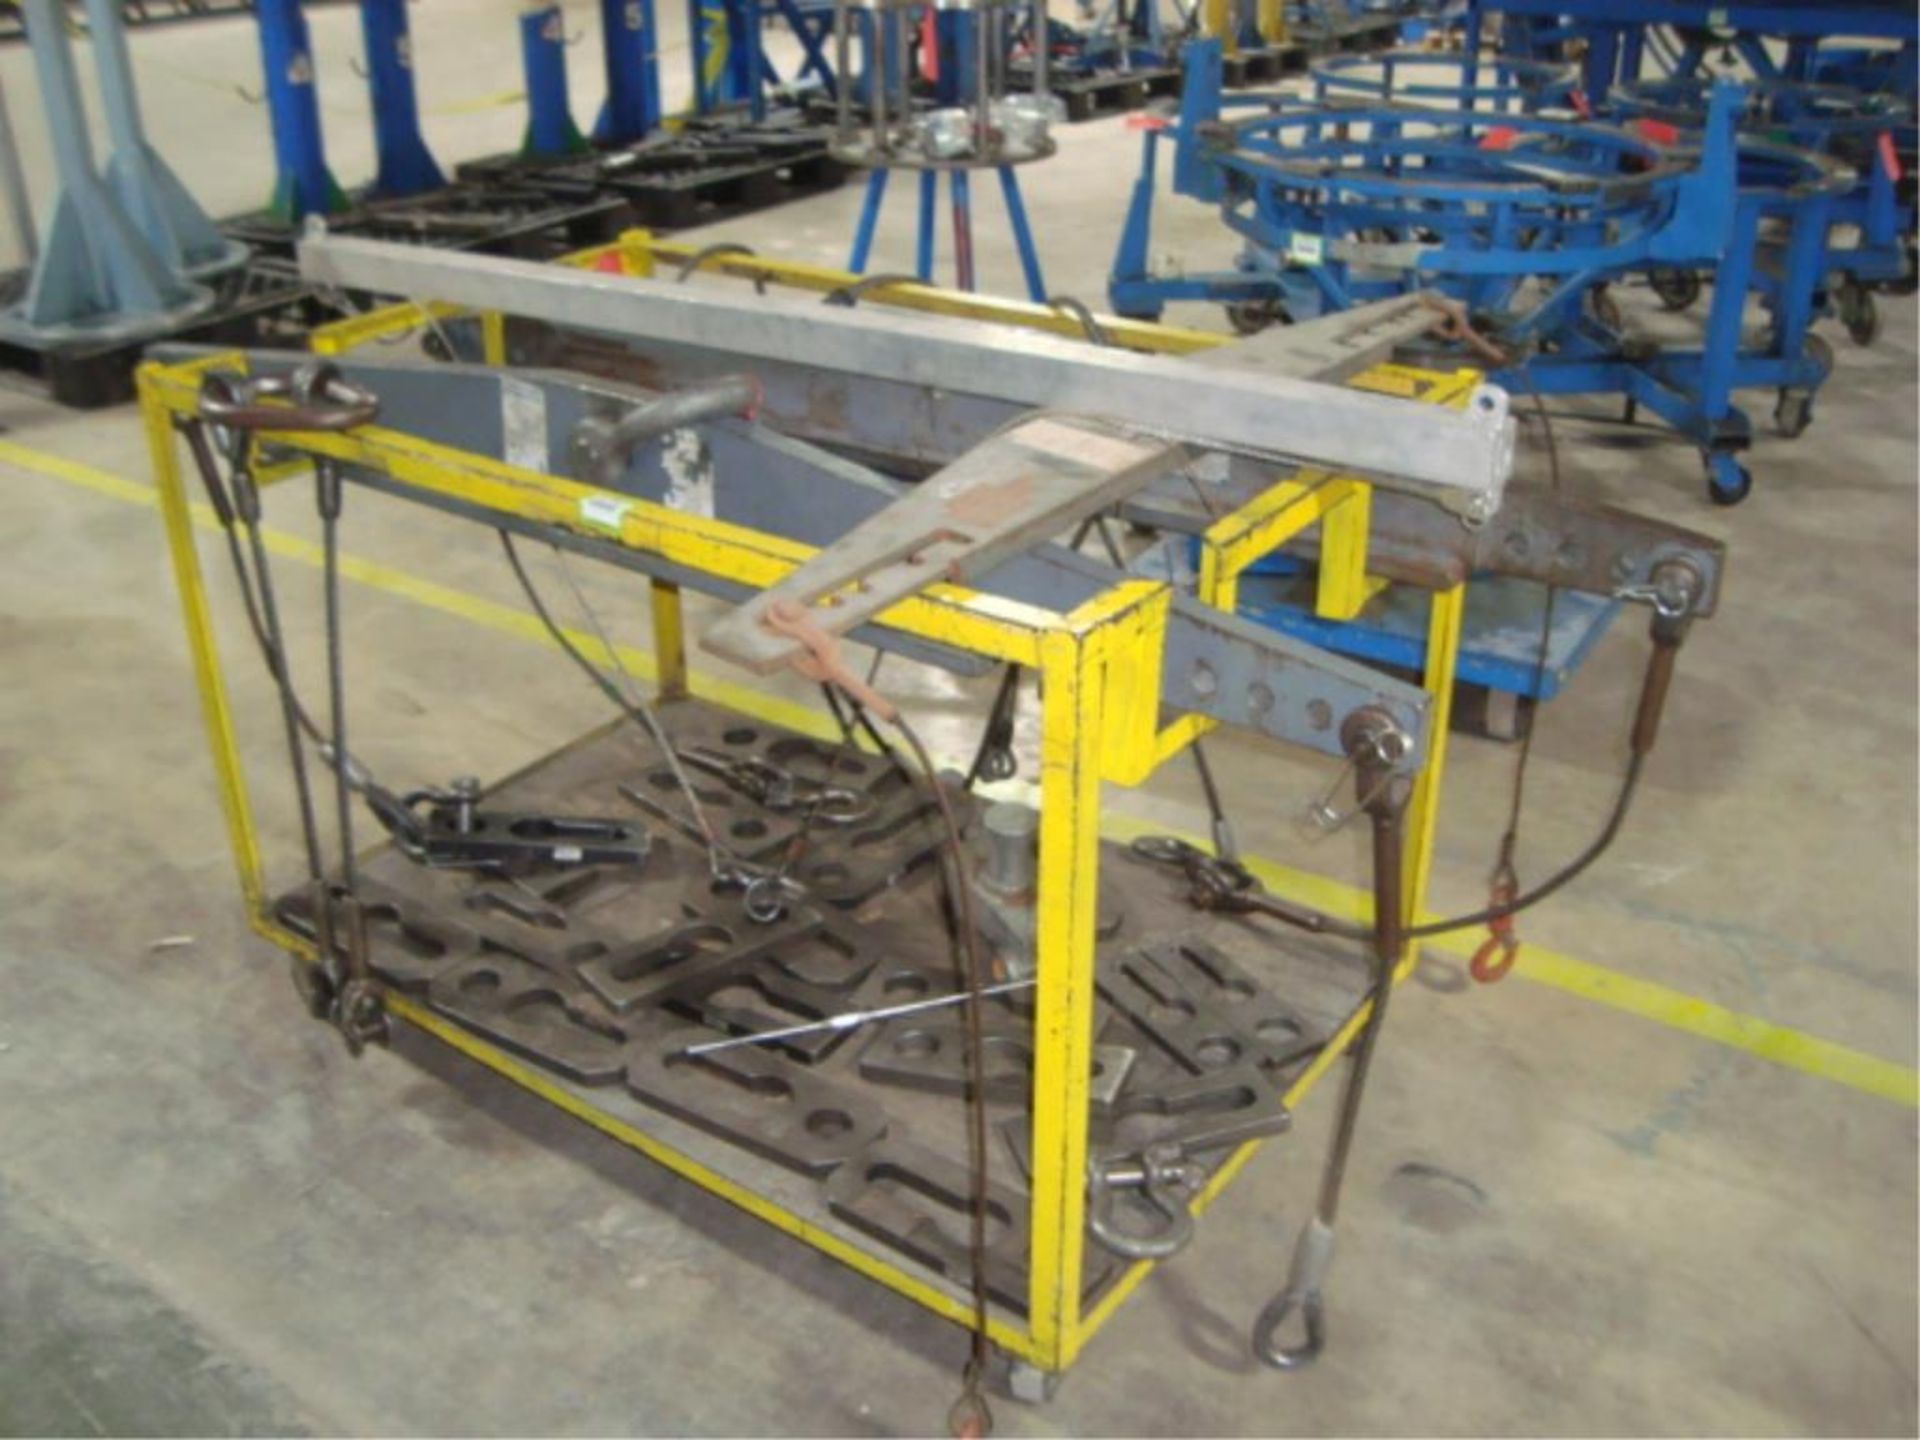 Tool Lift Bars & Mobile Cart With Fixtures - Image 4 of 7